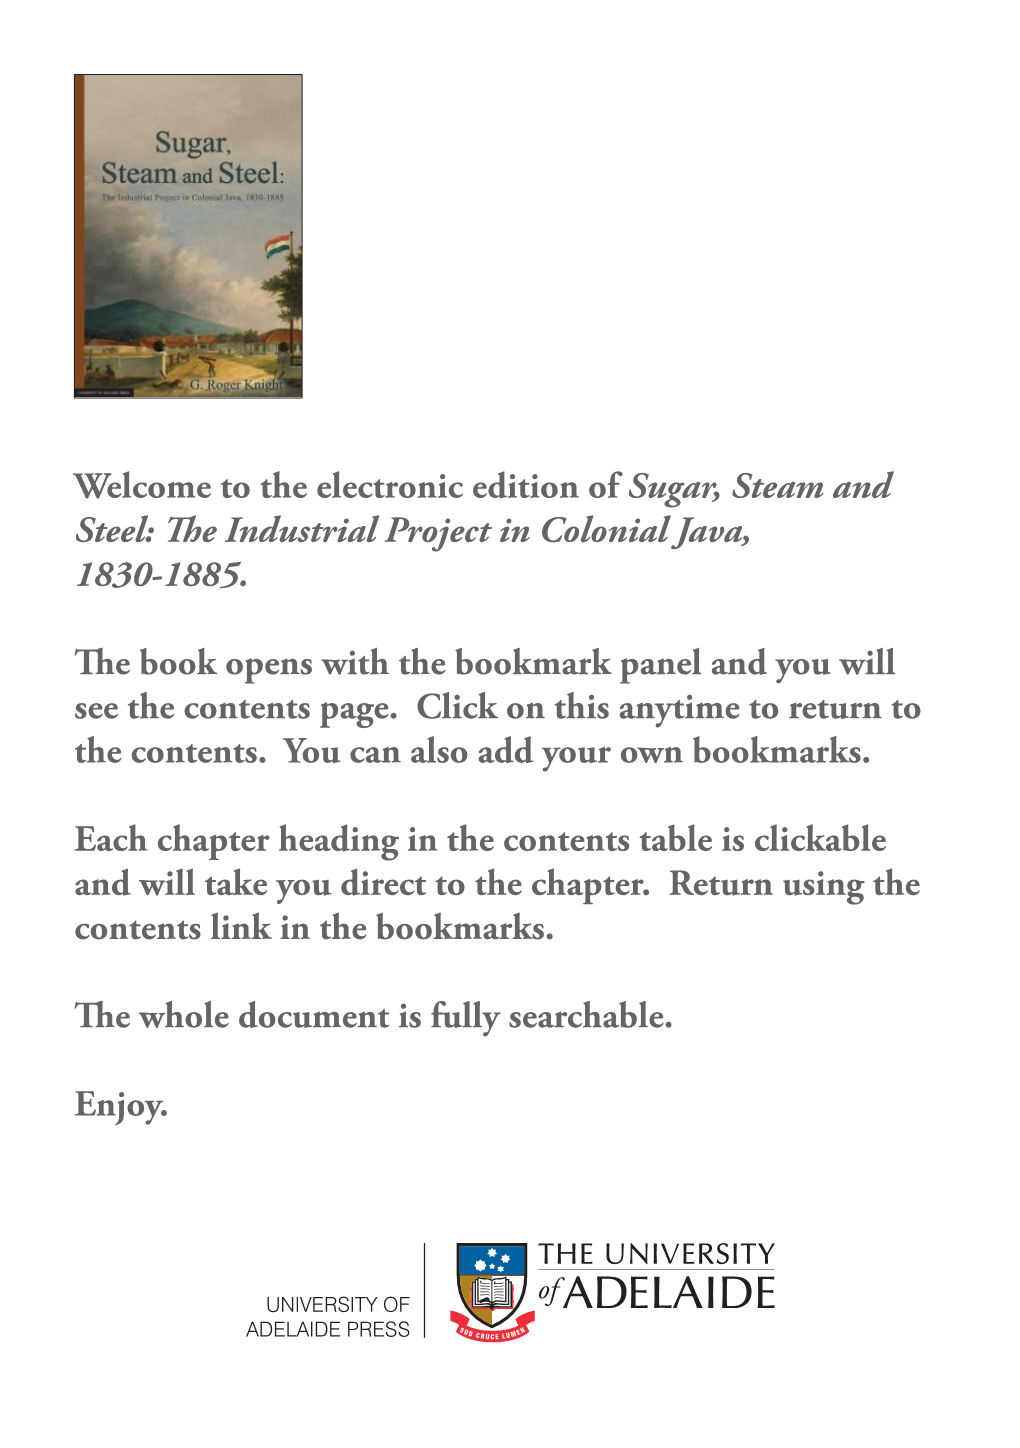 Sugar, Steam and Steel: the Industrial Project in Colonial Java, 1830-1885